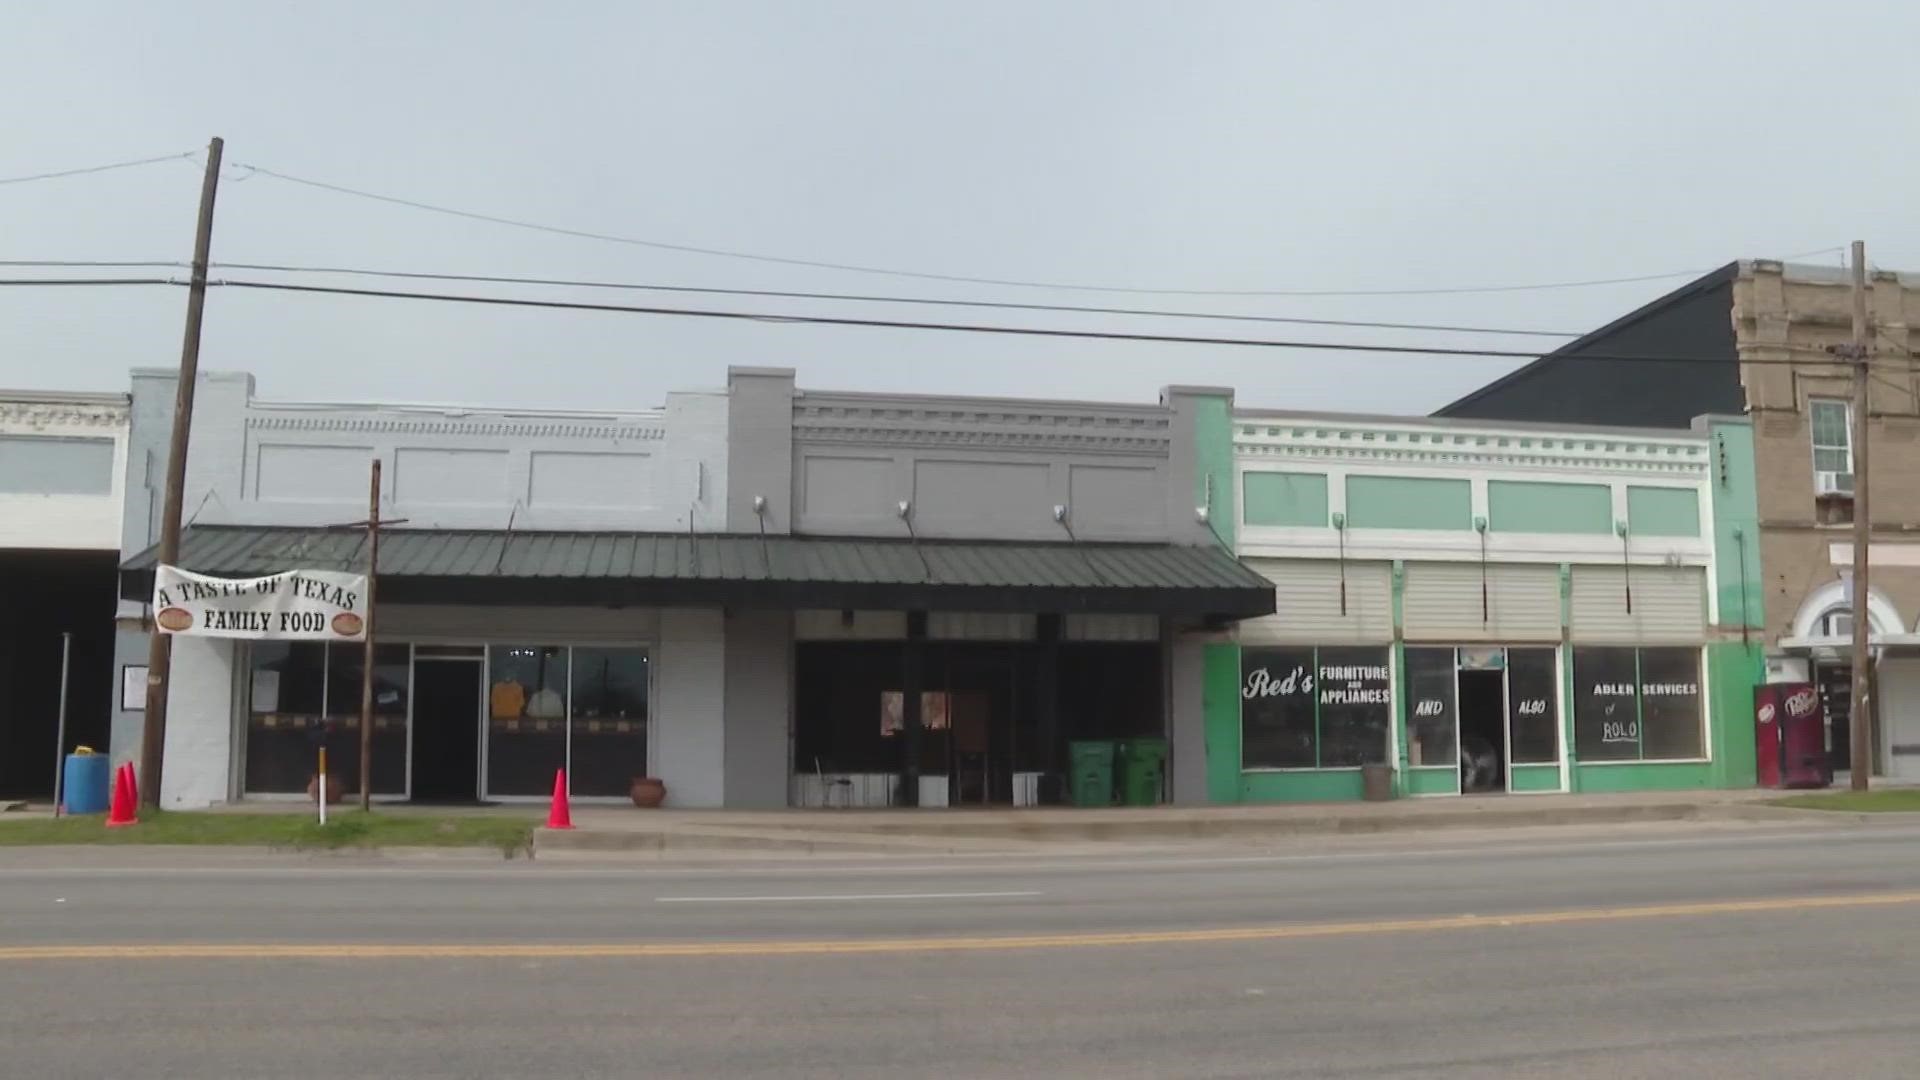 Robert Jones and DeWayne Luster have purchased the downtown strip in Lott and are fixing the buildings up.